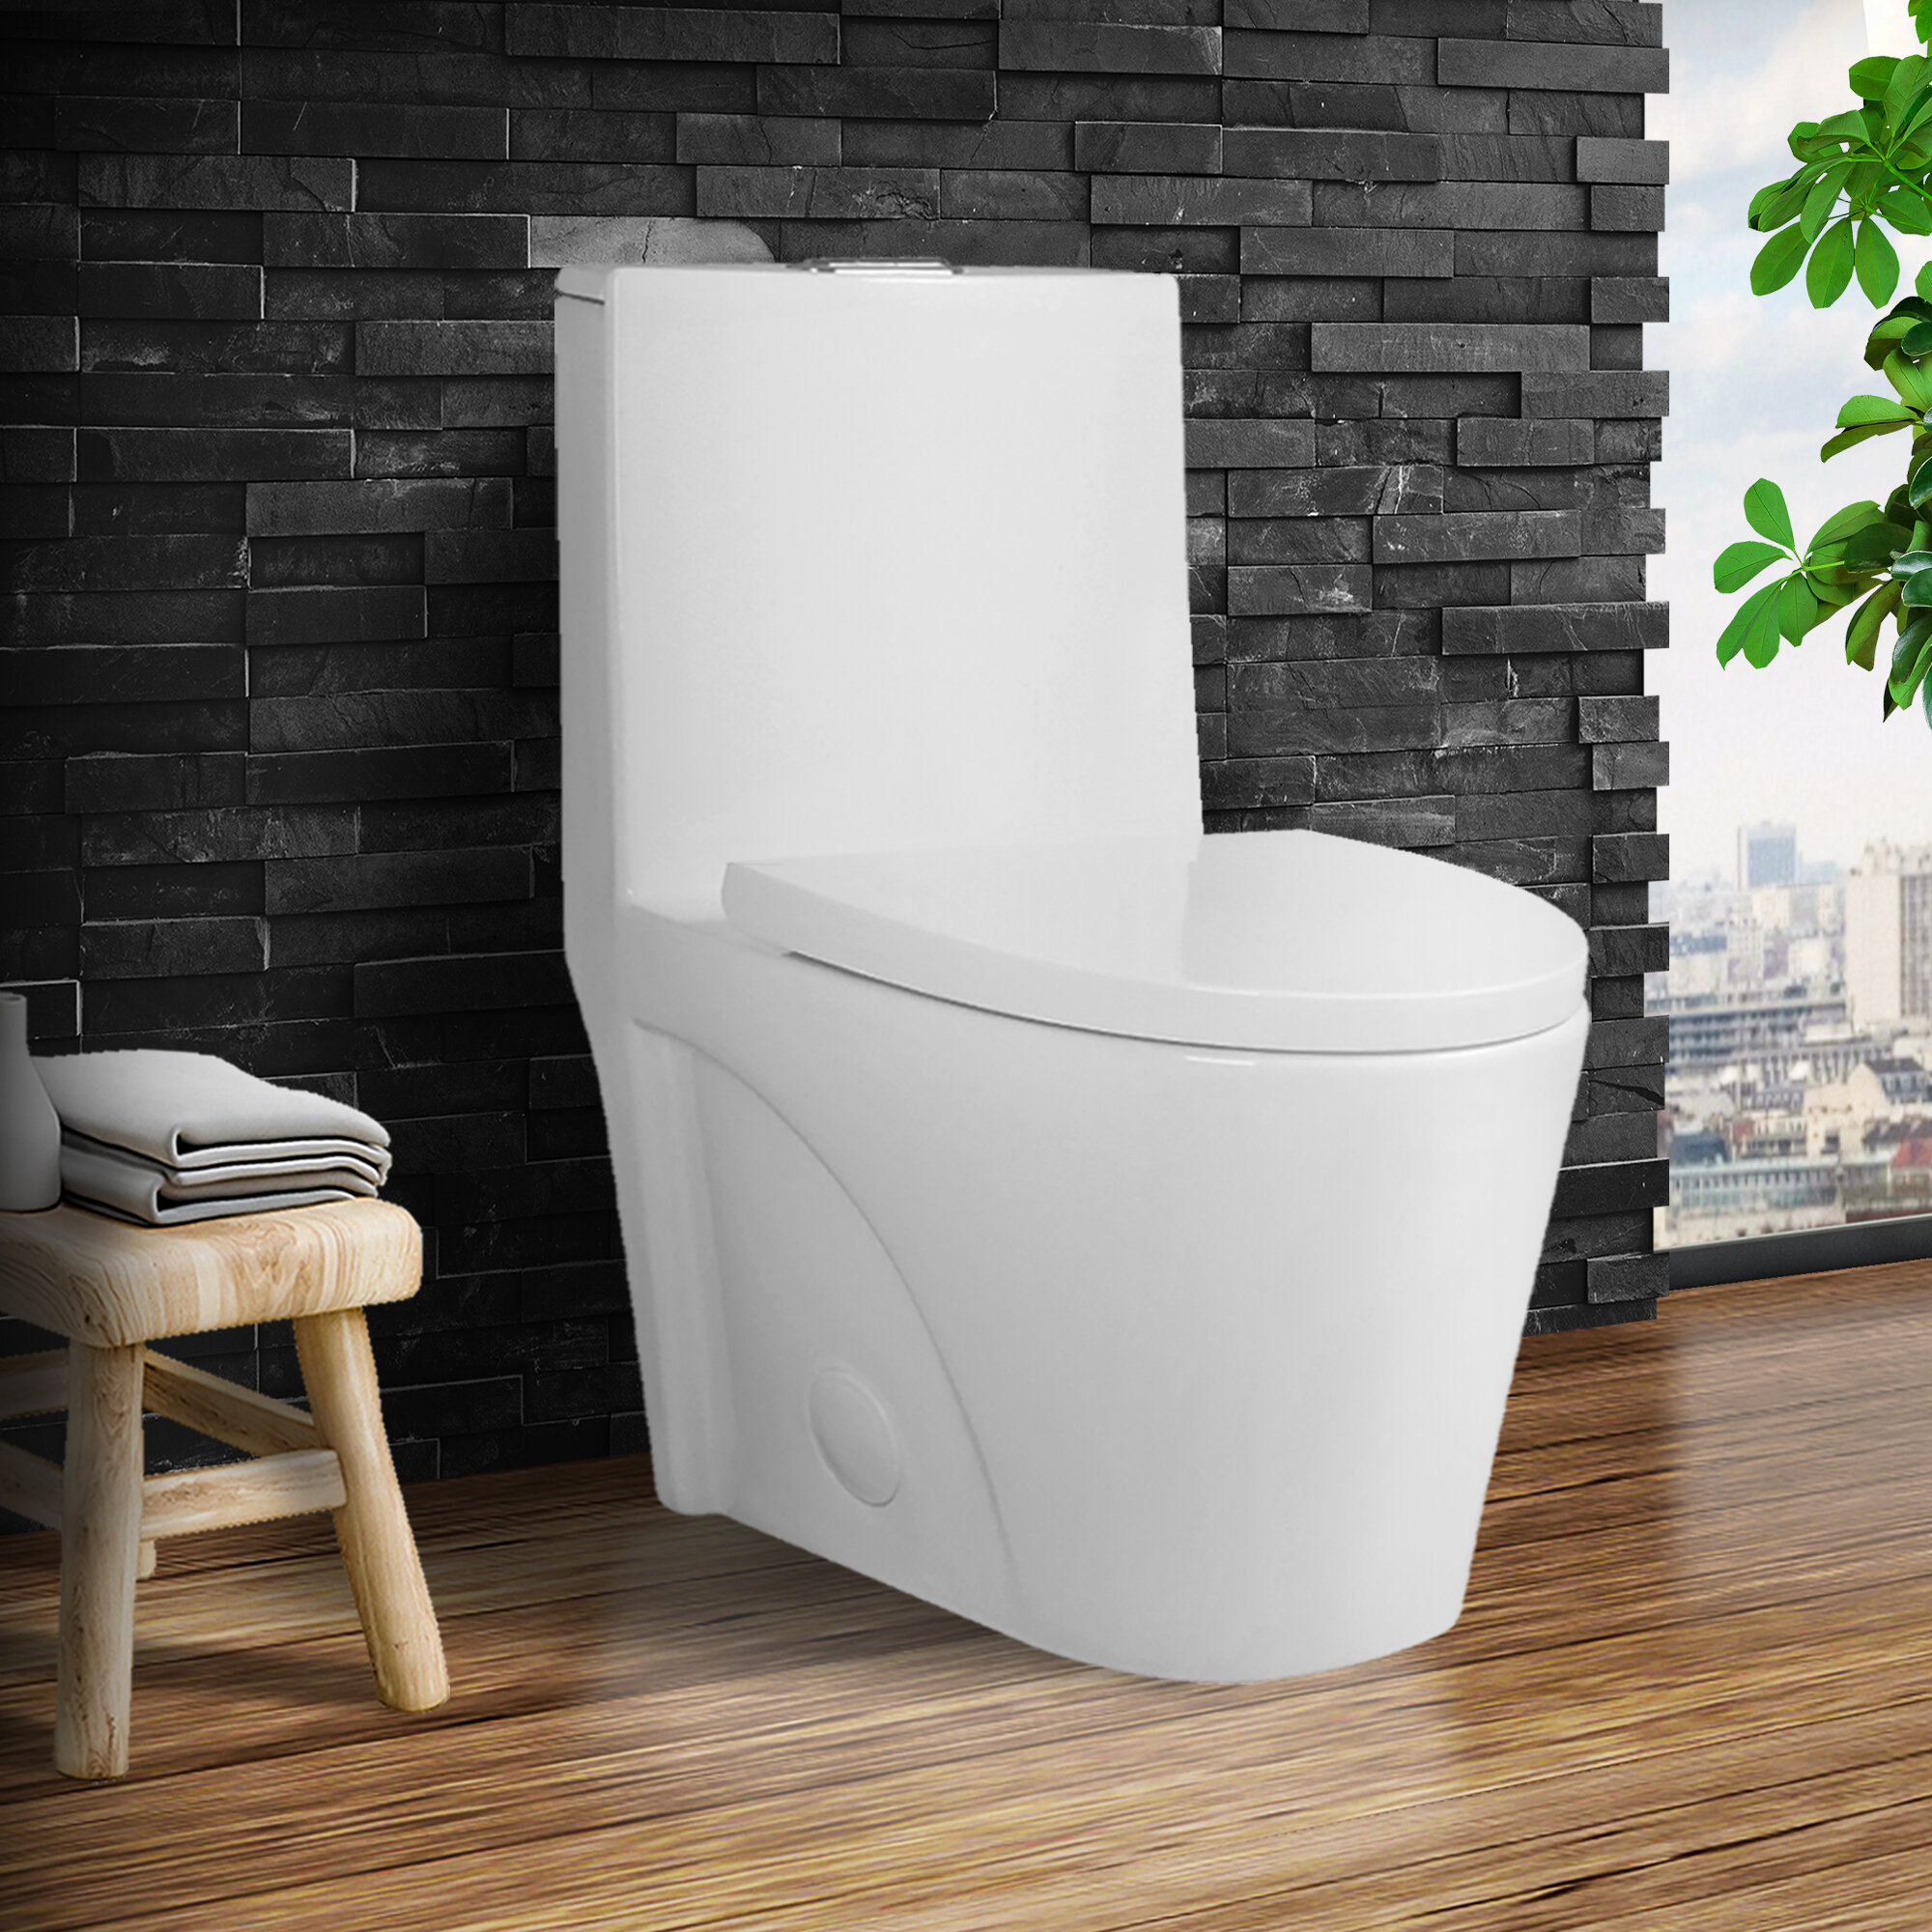 Details about   HOROW One Piece Toilet Compact Bathroom Mini Dual Flush Commode Water Closet 